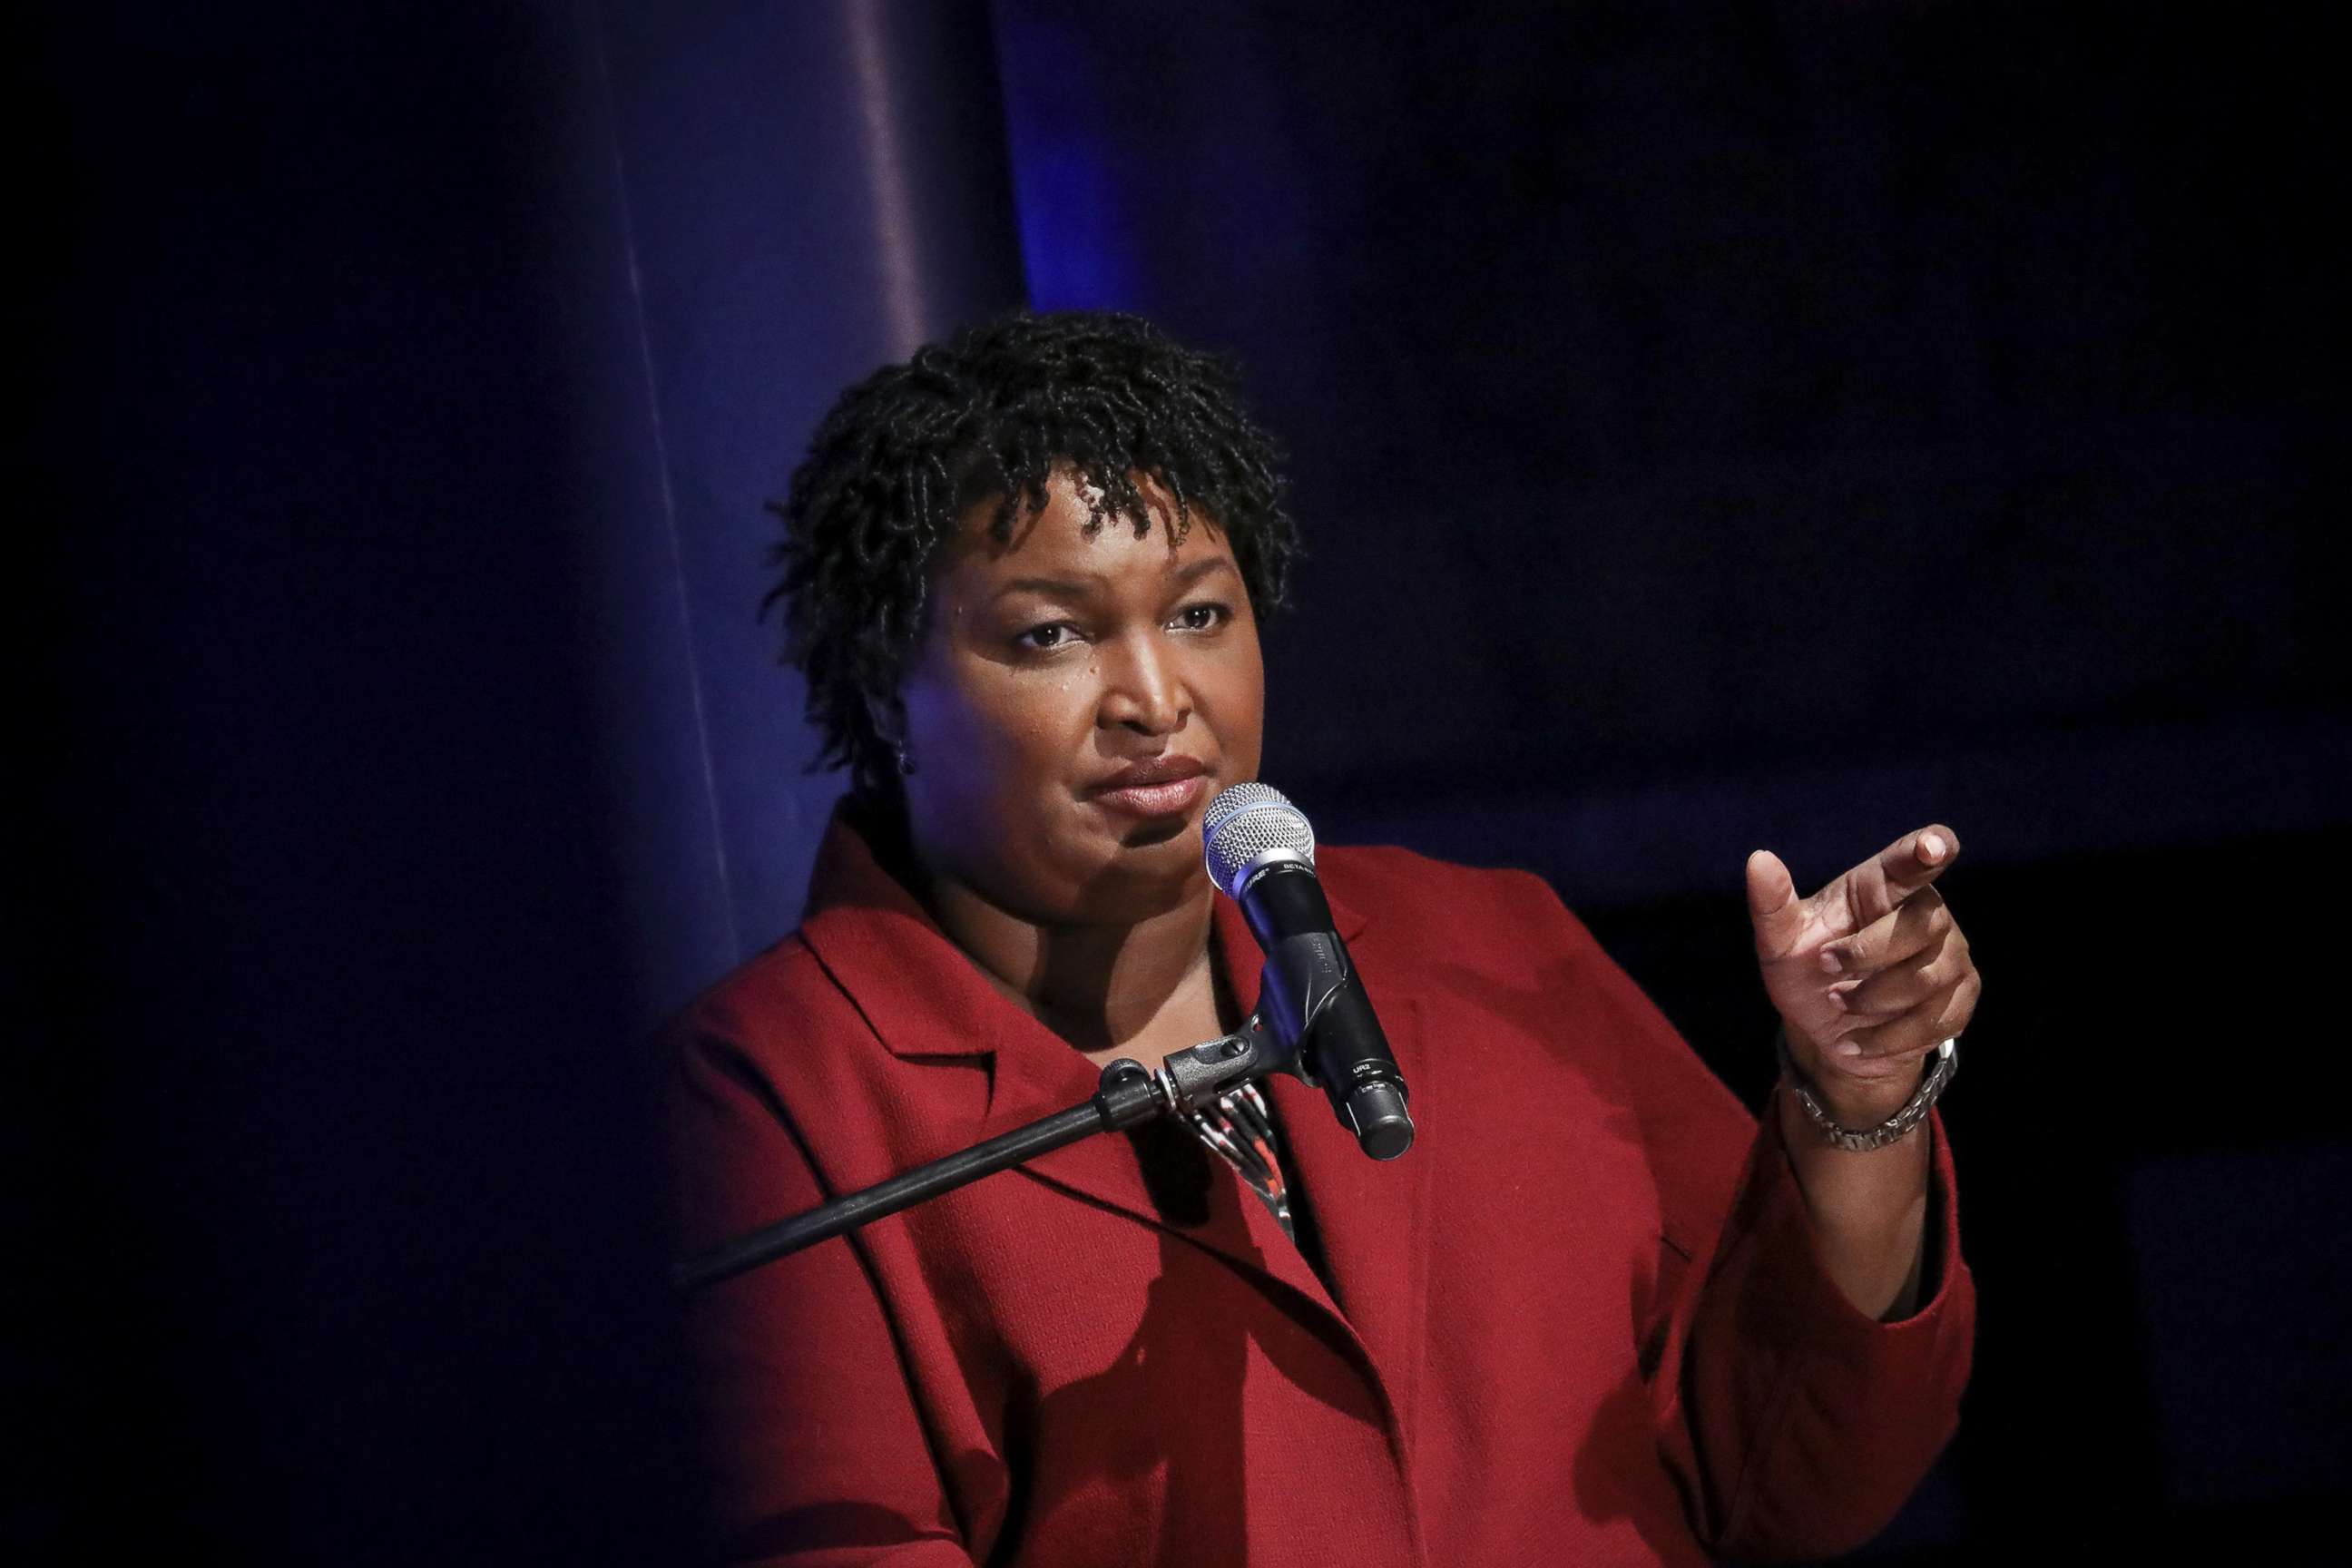 PHOTO: Former Georgia gubernatorial candidate Stacey Abrams speaks during a conversation about criminal justice reform at the New York Public Library, April 10, 2019 in New York City.